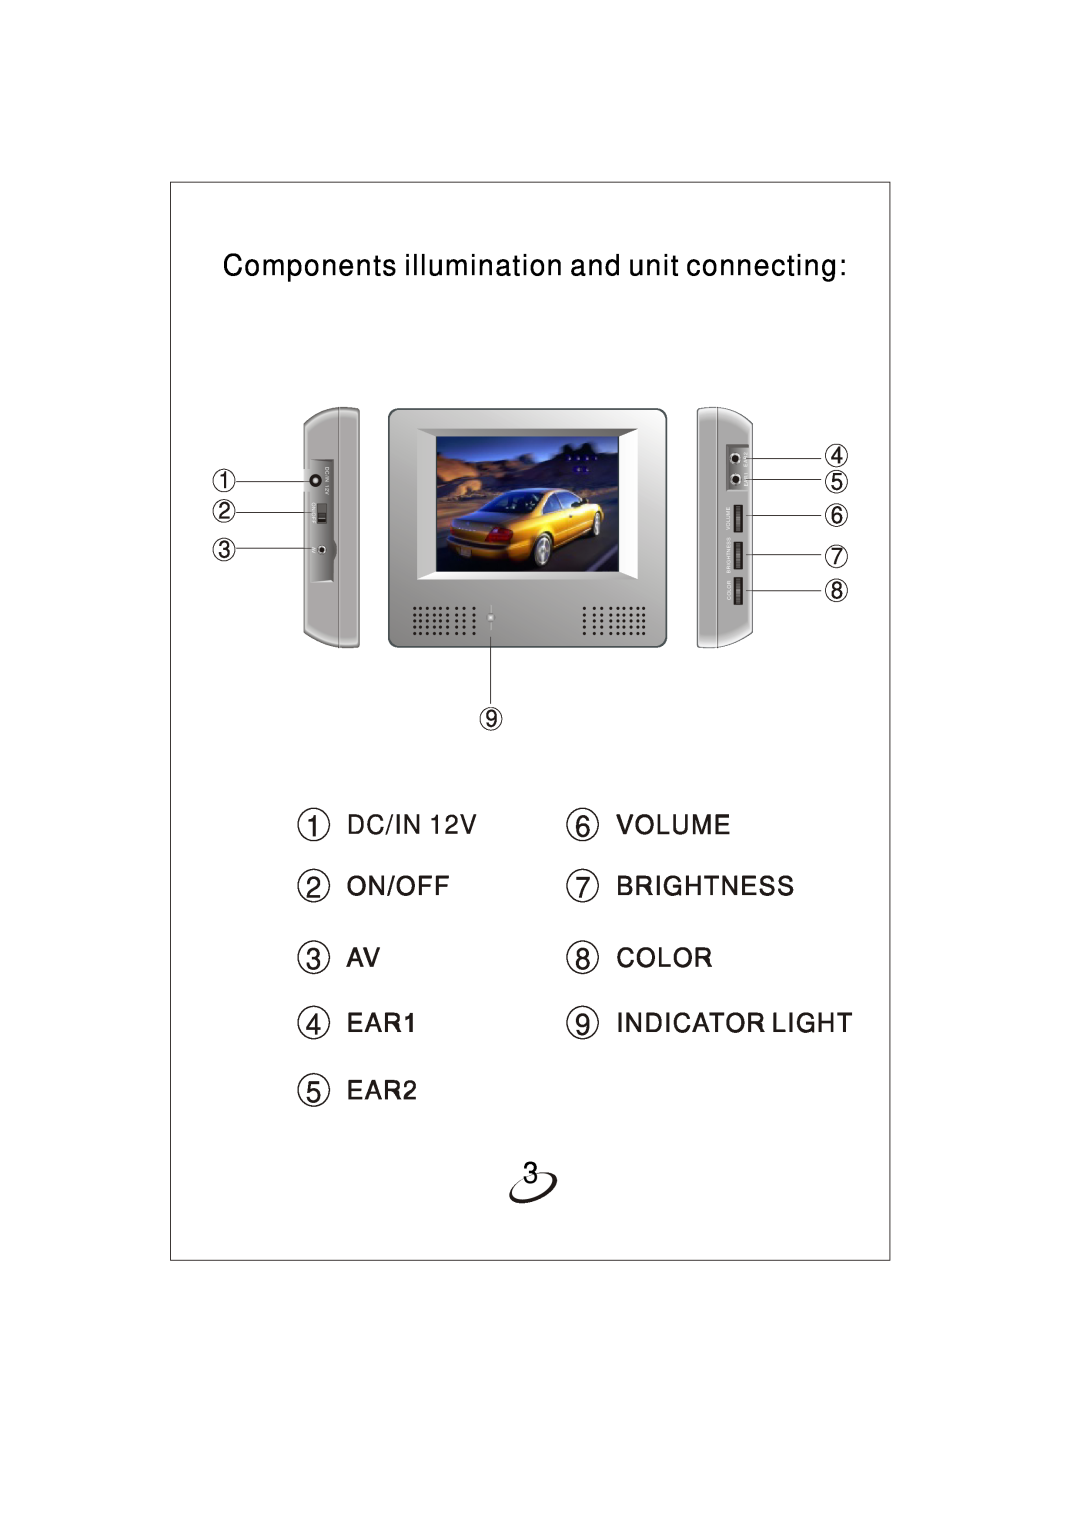 PYLE Audio PLDVDBG5 Components illumination and unit connecting, Dc/In, Volume, On/Off, Brightness, Color, EAR1, 5 EAR2 